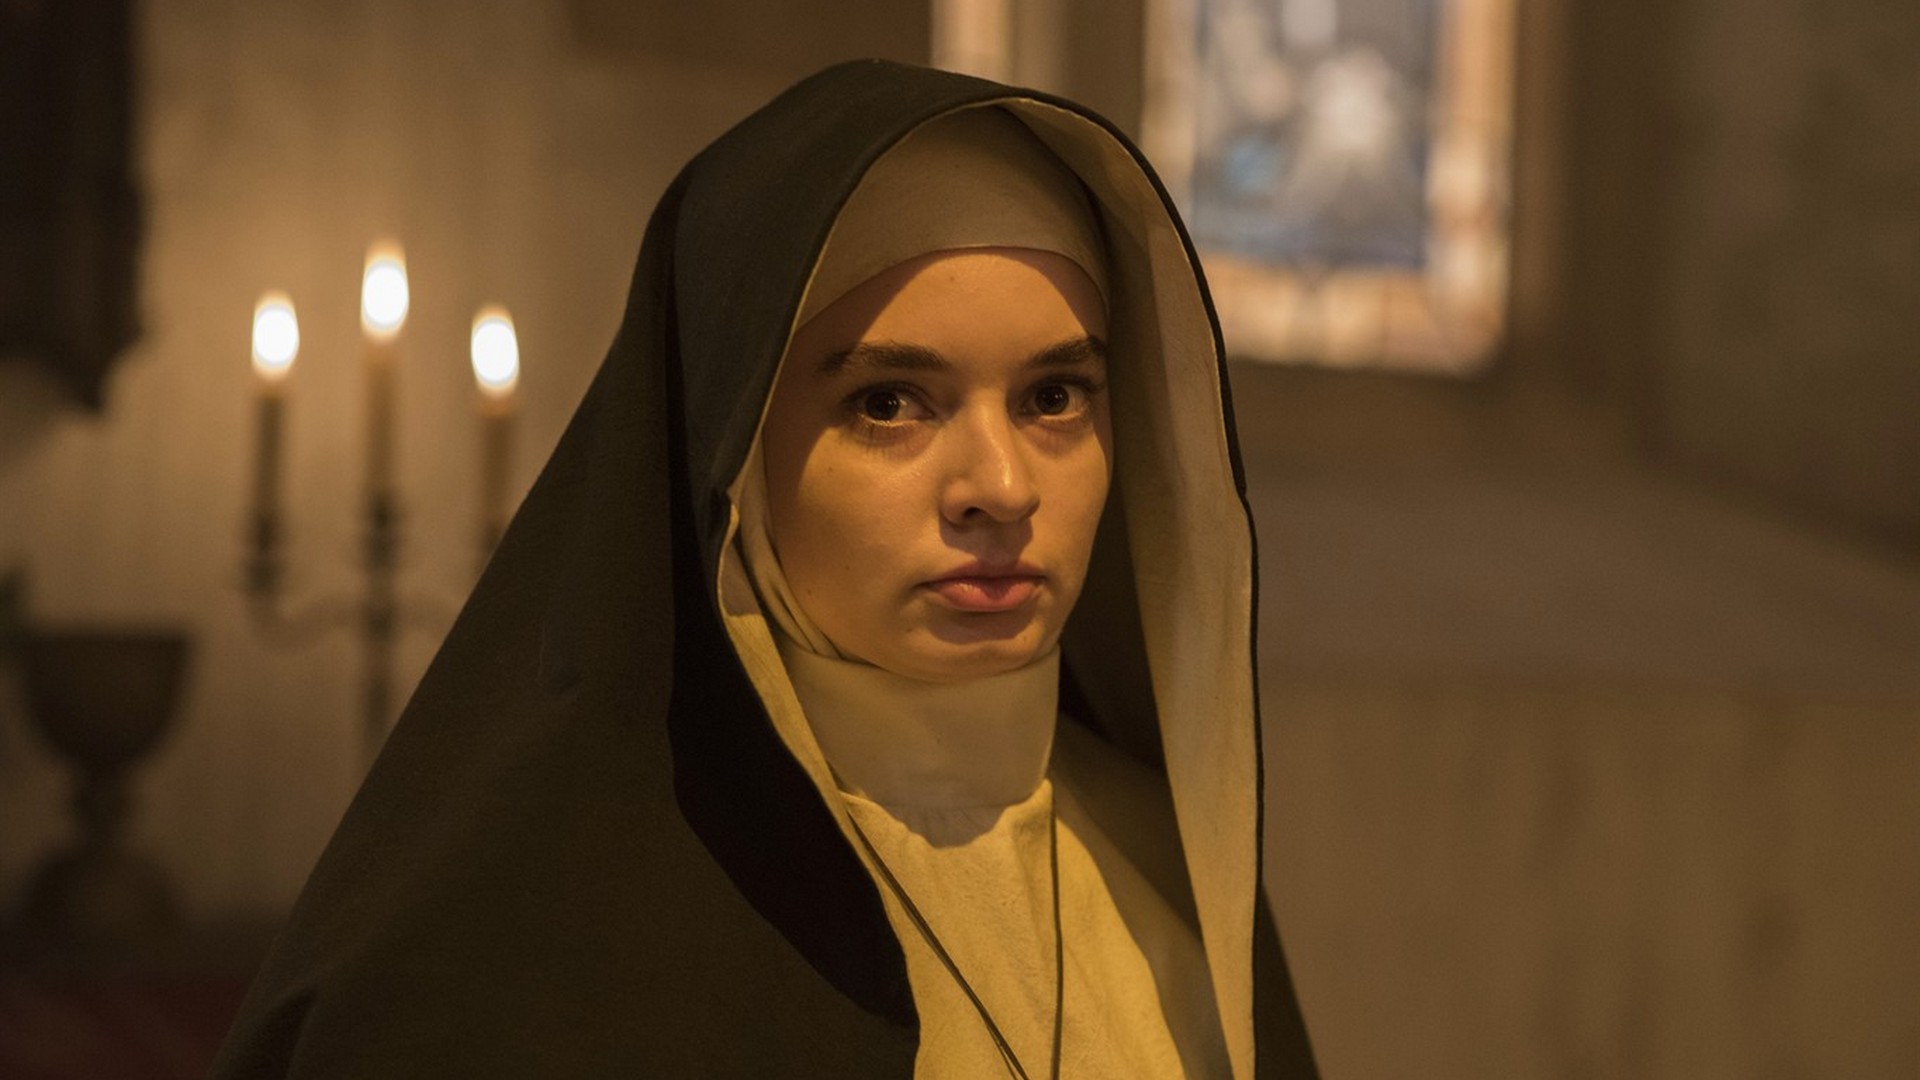 The Nun Movie HD Wallpaper With Resolution 1920X1080 pixel. You can make this wallpaper for your Desktop Computer Backgrounds, Mac Wallpapers, Android Lock screen or iPhone Screensavers